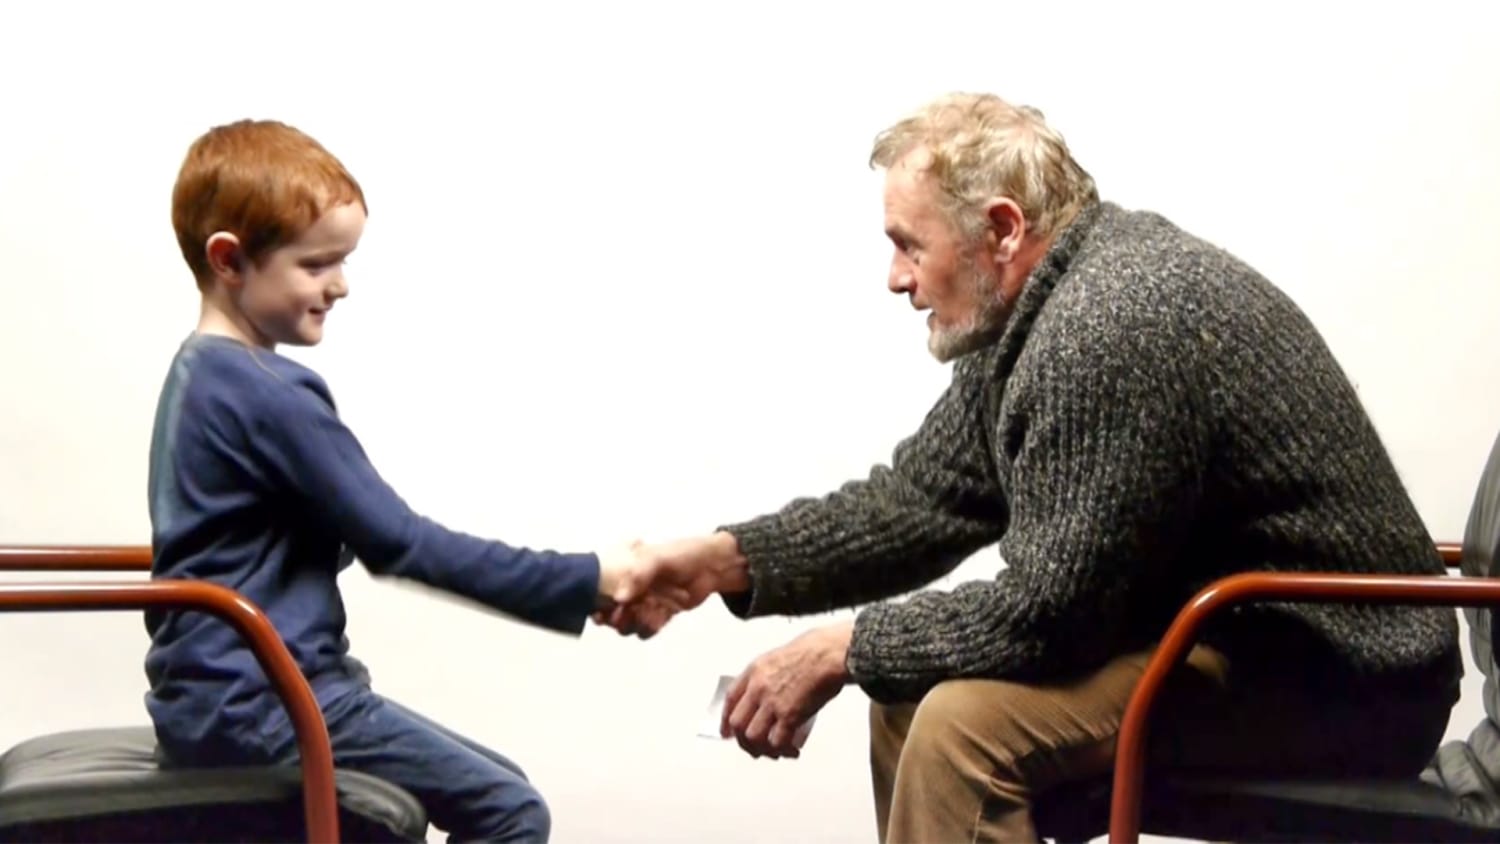 Boy, 7, and man, 64, answer life's questions in adorable viral video